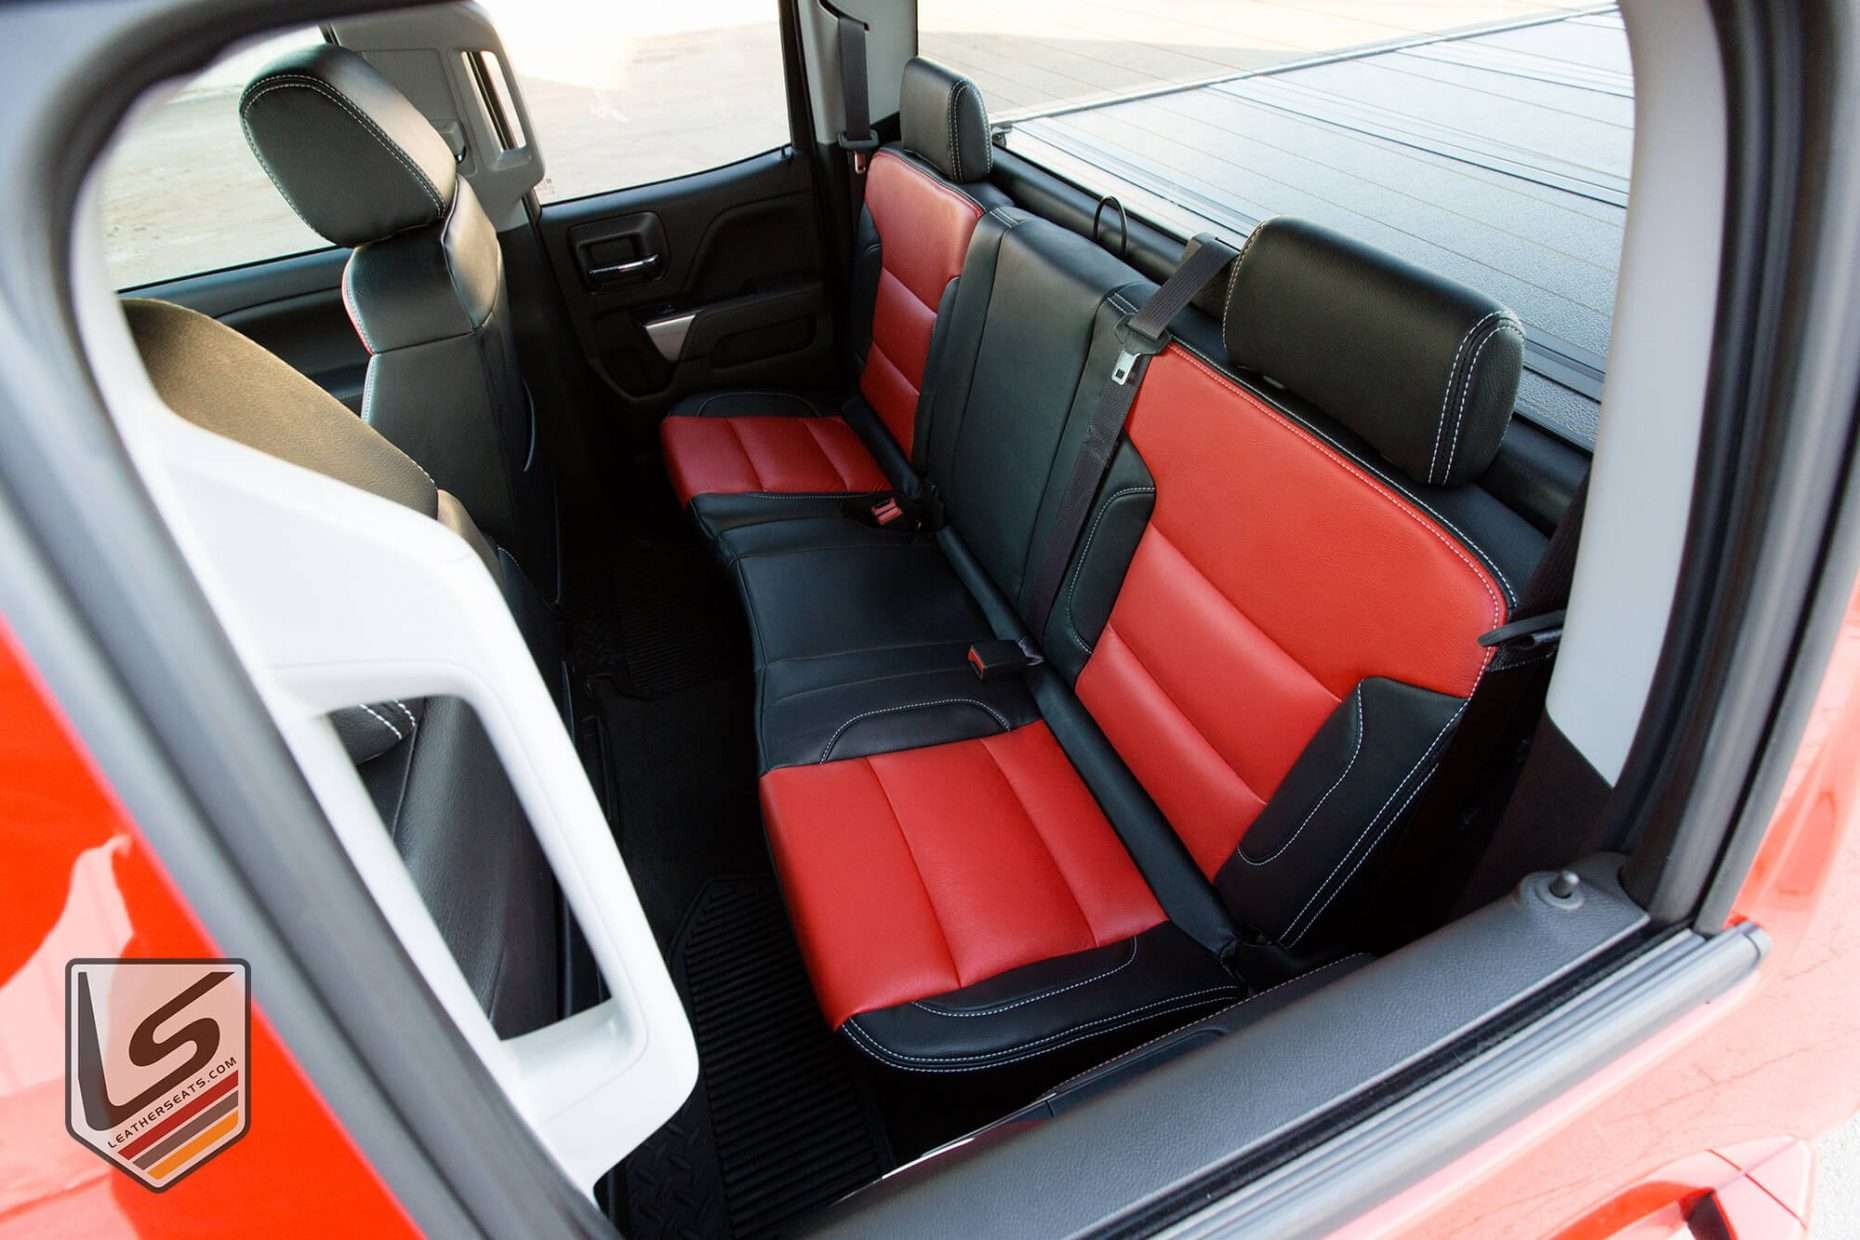 Top-down view of rear leather seats from driver's side